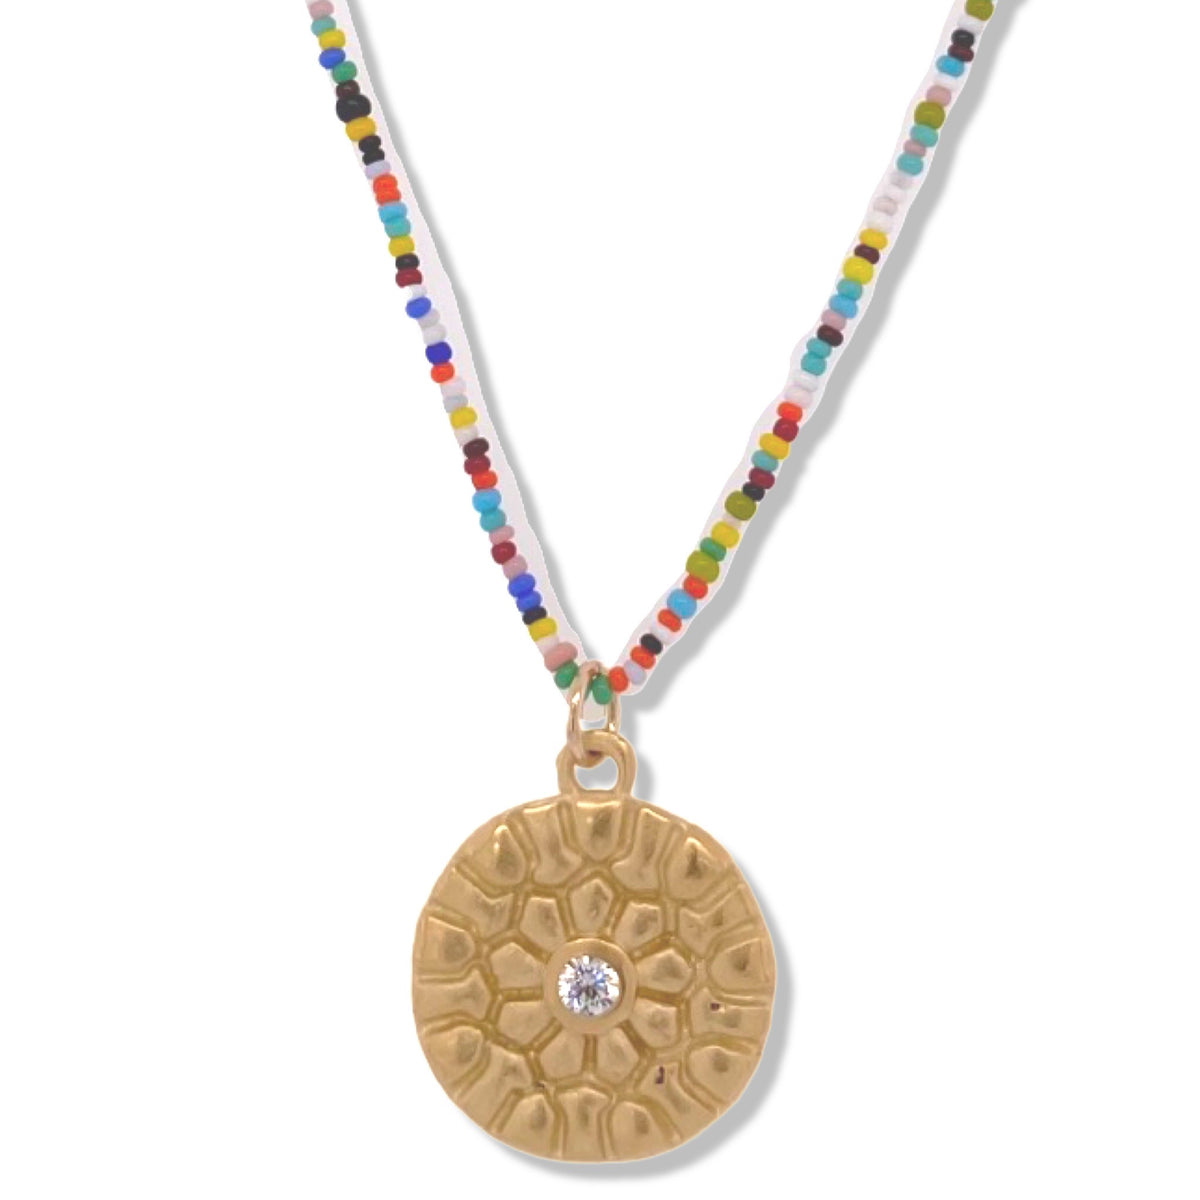 Essa Necklace in Gold on Multi color micro beads | keely Smith Jewelry Designs